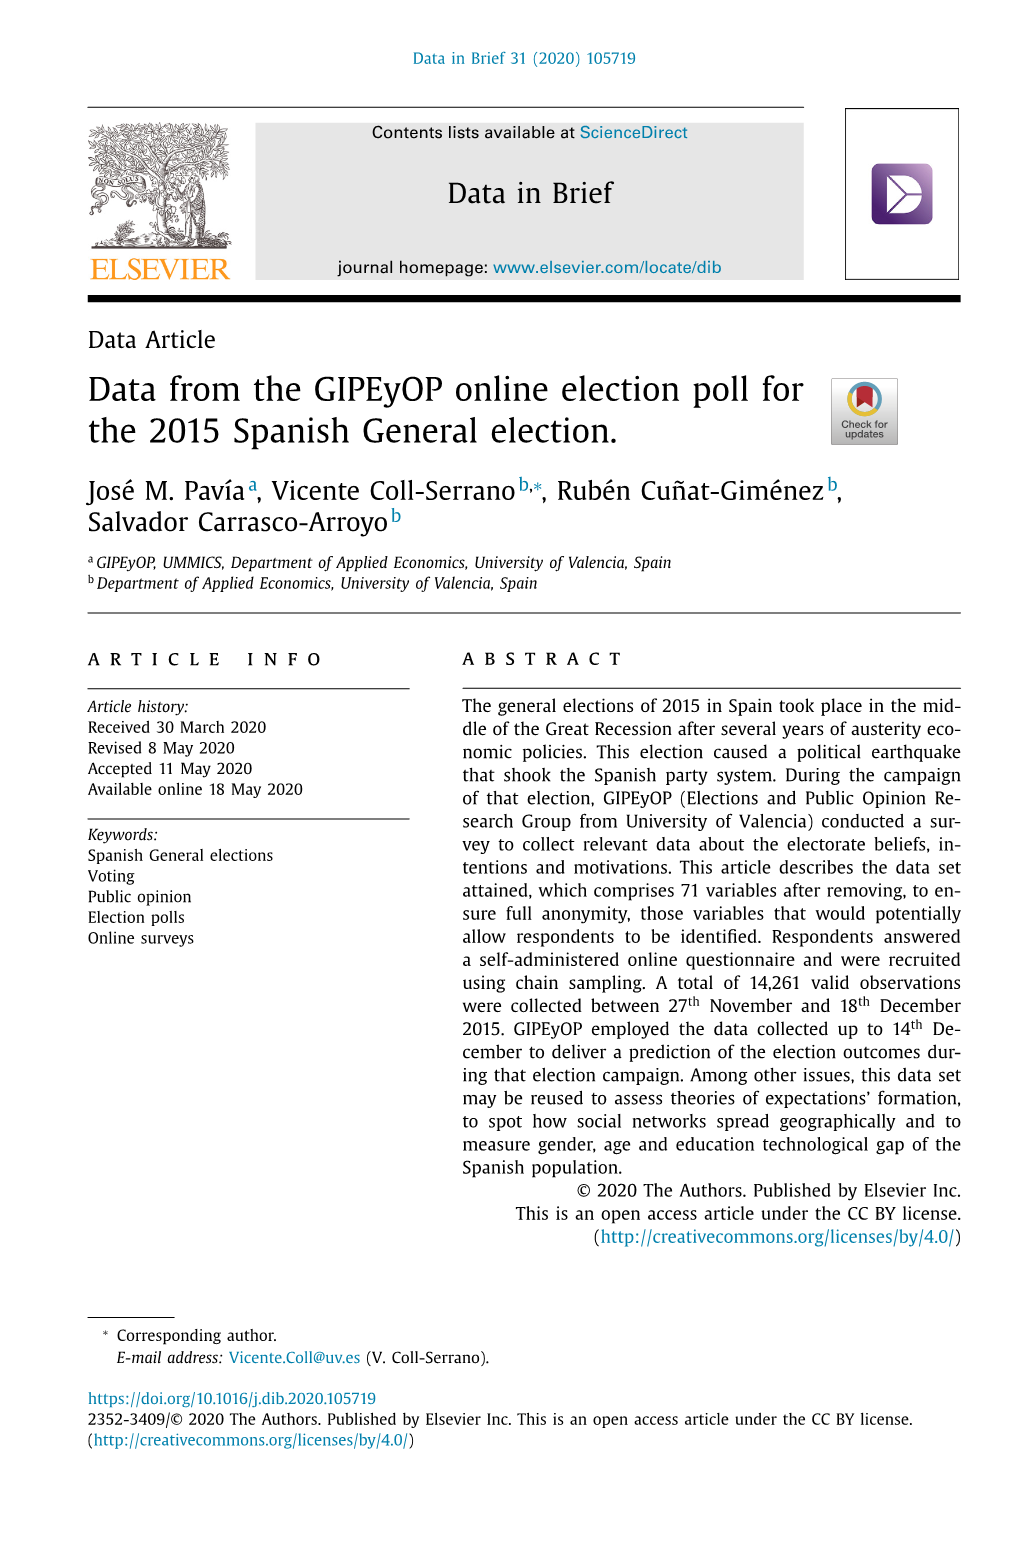 Data from the Gipeyop Online Election Poll for the 2015 Spanish General Election